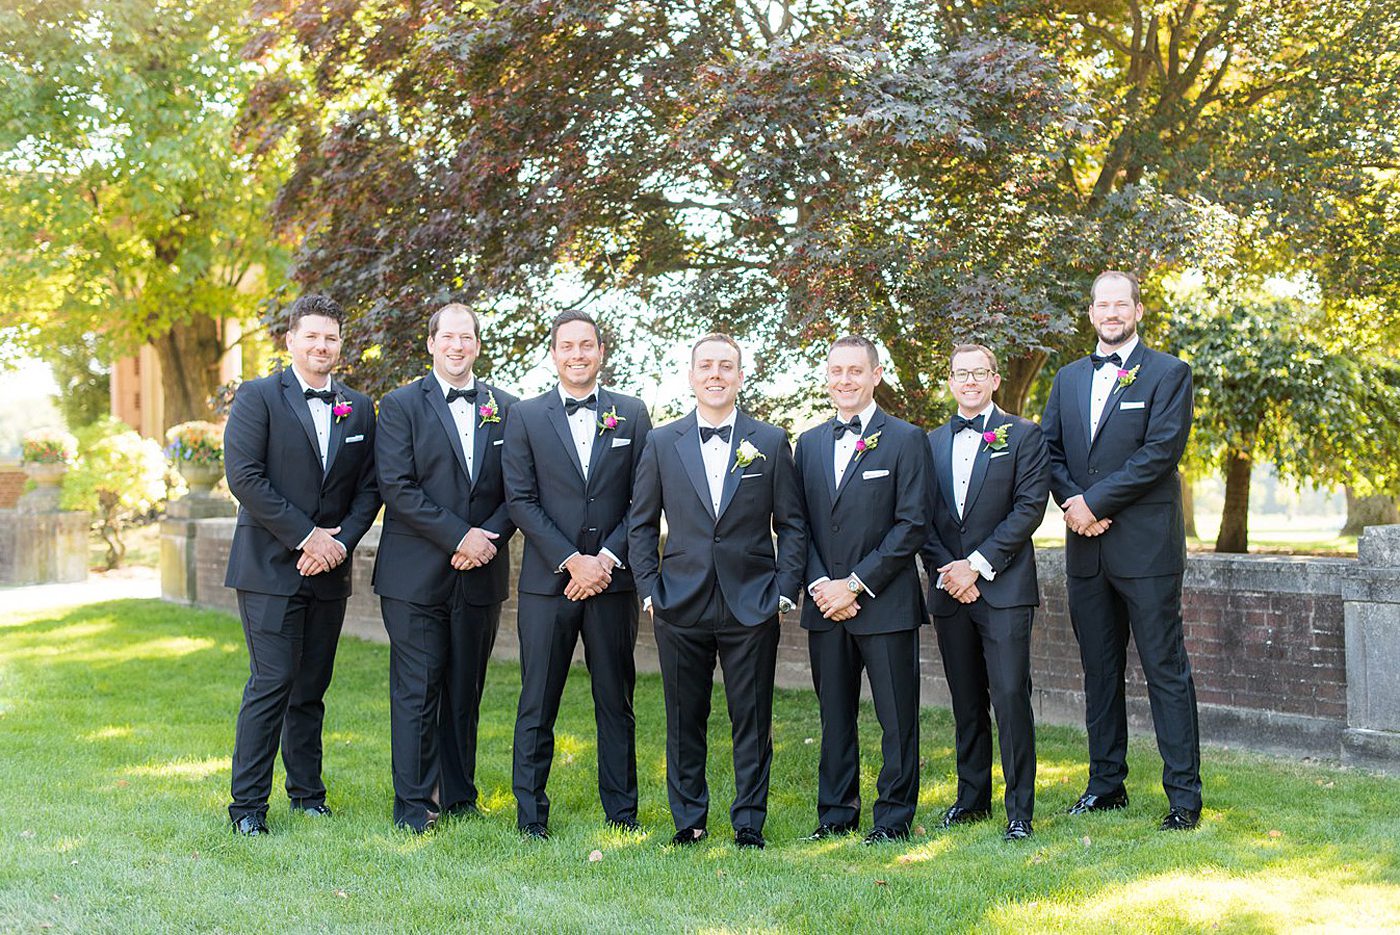 Photos by Mikkel Paige Photography at Waveny House wedding venue in New Canaan, Connecticut. This beautiful venue has an outdoor garden for the ceremony and indoor historic home for the reception. The groom and groomsmen wore black tuxedos with rose boutonnieres. #mikkelpaige #wavenyhouse #wavenyhousewedding #connecticutweddingvenue #connecticutweddingphotographer #weddingparty #groomsmen #blacktuxedos